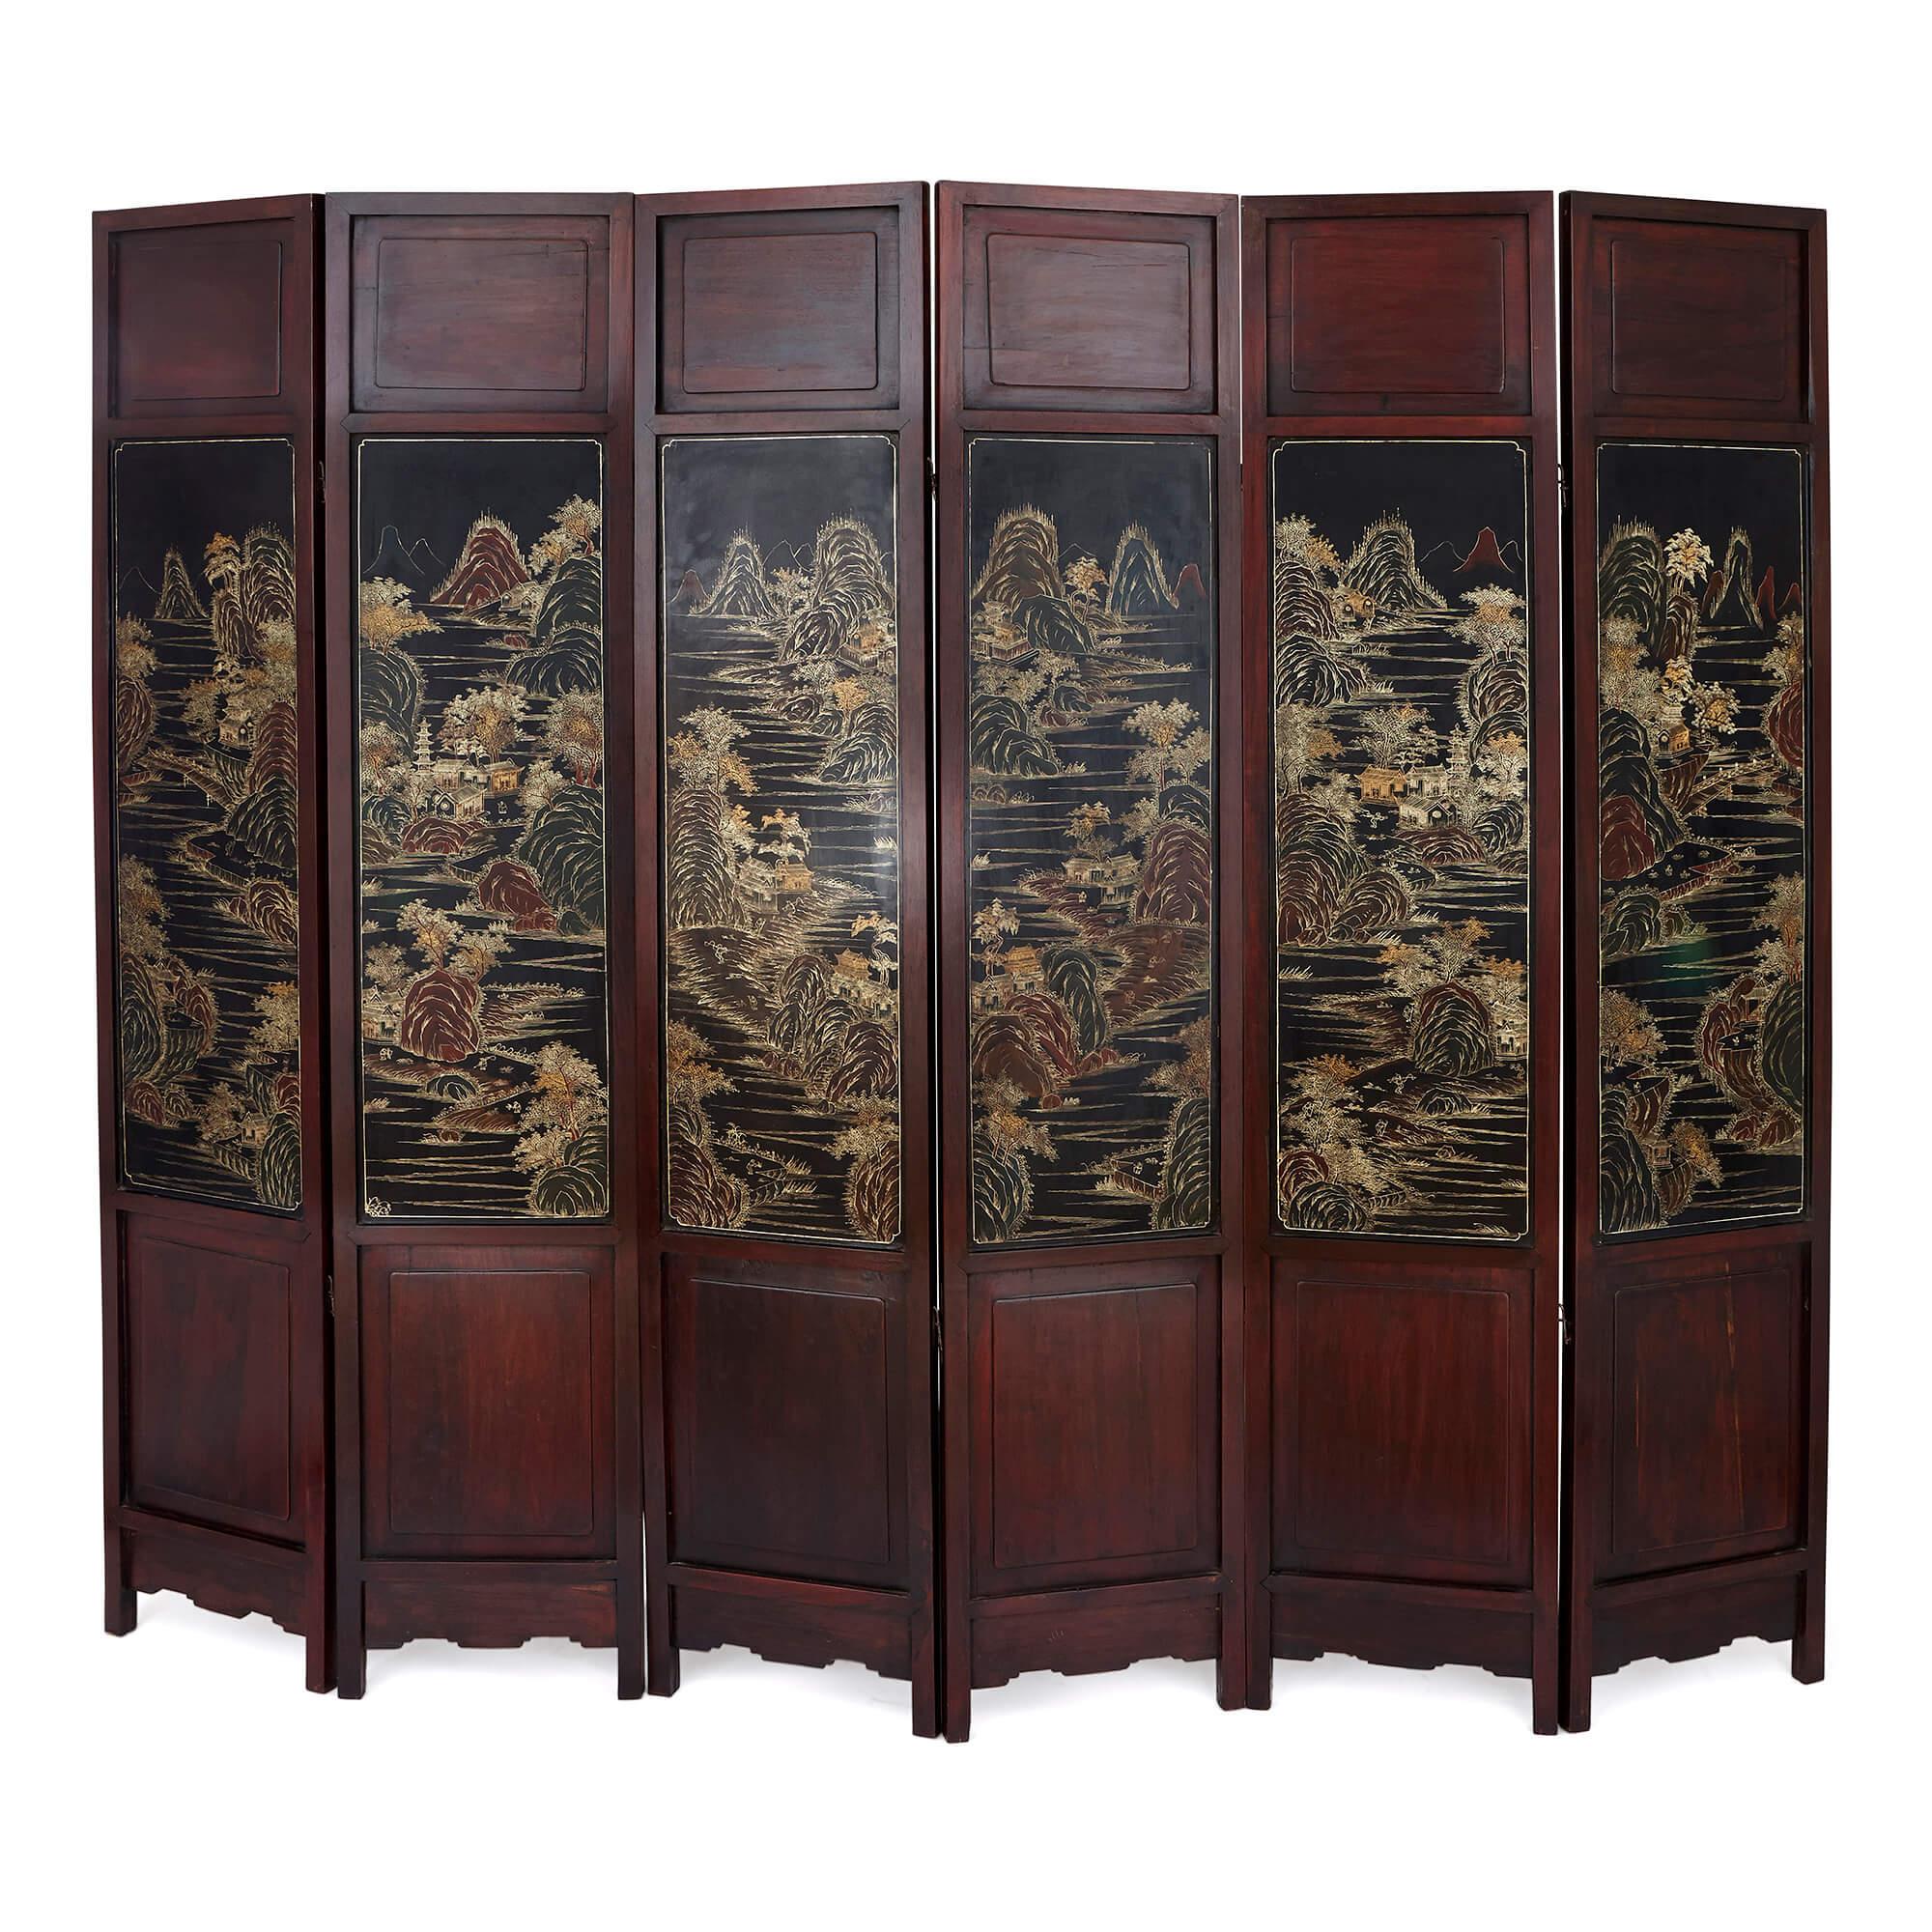 Dedicated craftsmanship in traditional techniques, combined with refined simplicity in design, makes this antique Chinese screen a truly special piece. Built from hardwood and decorated with lacquer, hardstones, enamels, and paint, the screen is a